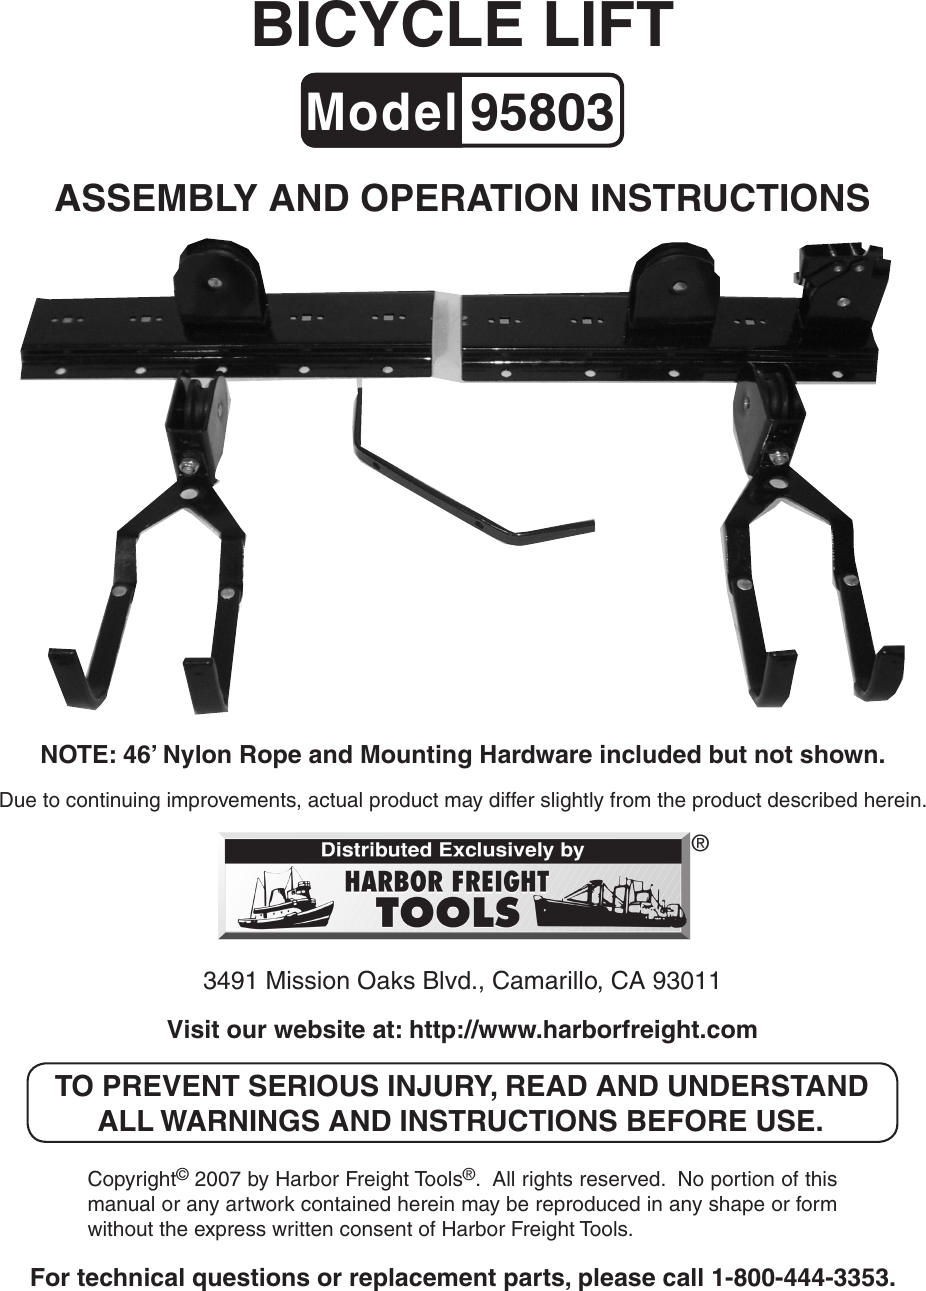 Page 1 of 8 - Harbor-Freight Harbor-Freight-Bicycle-Lift-Product-Manual-  Harbor-freight-bicycle-lift-product-manual